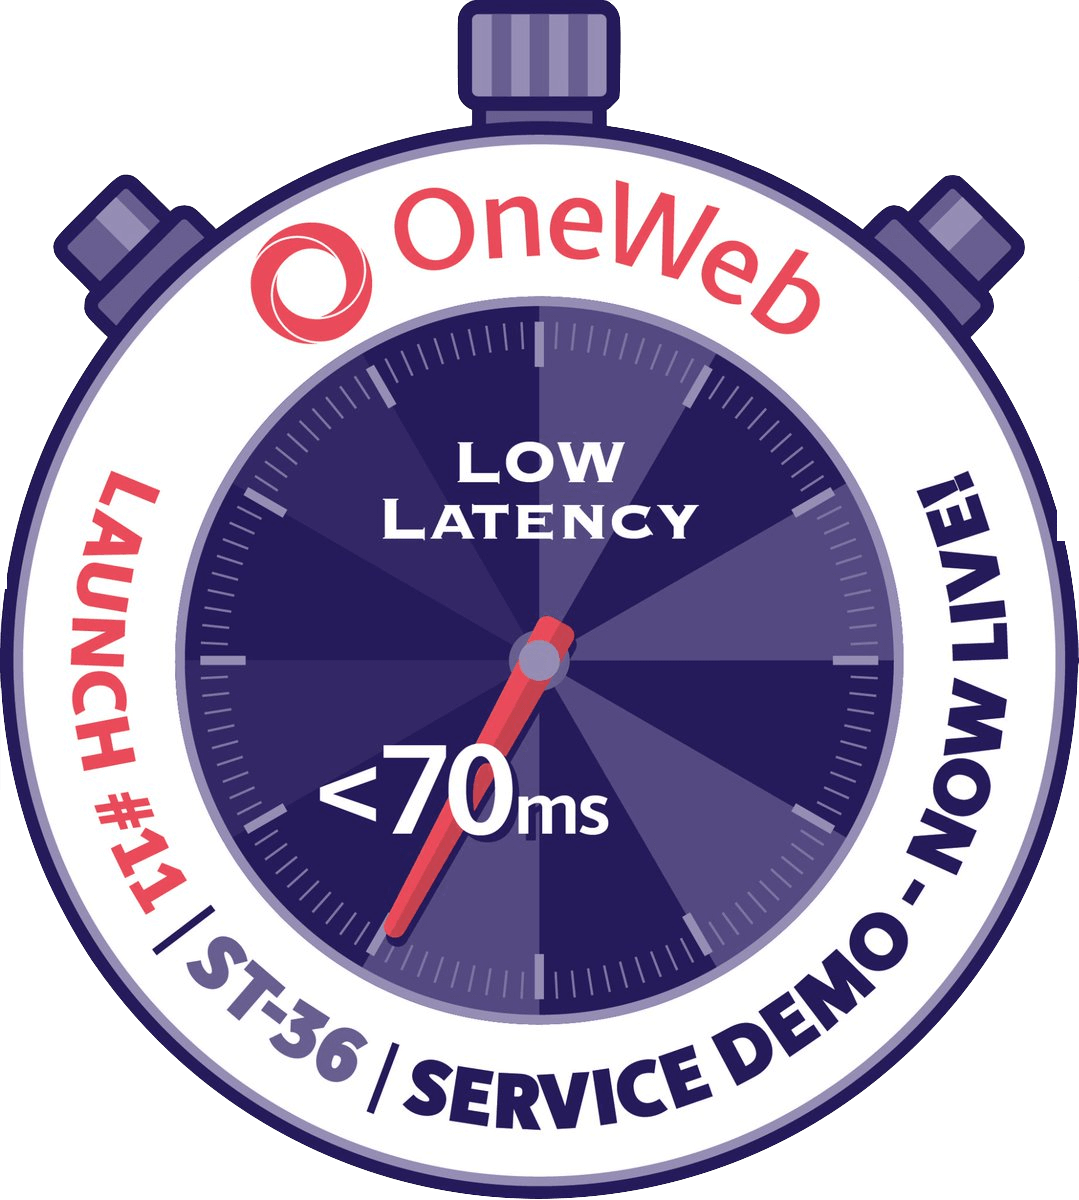 Mission patch for OneWeb 11